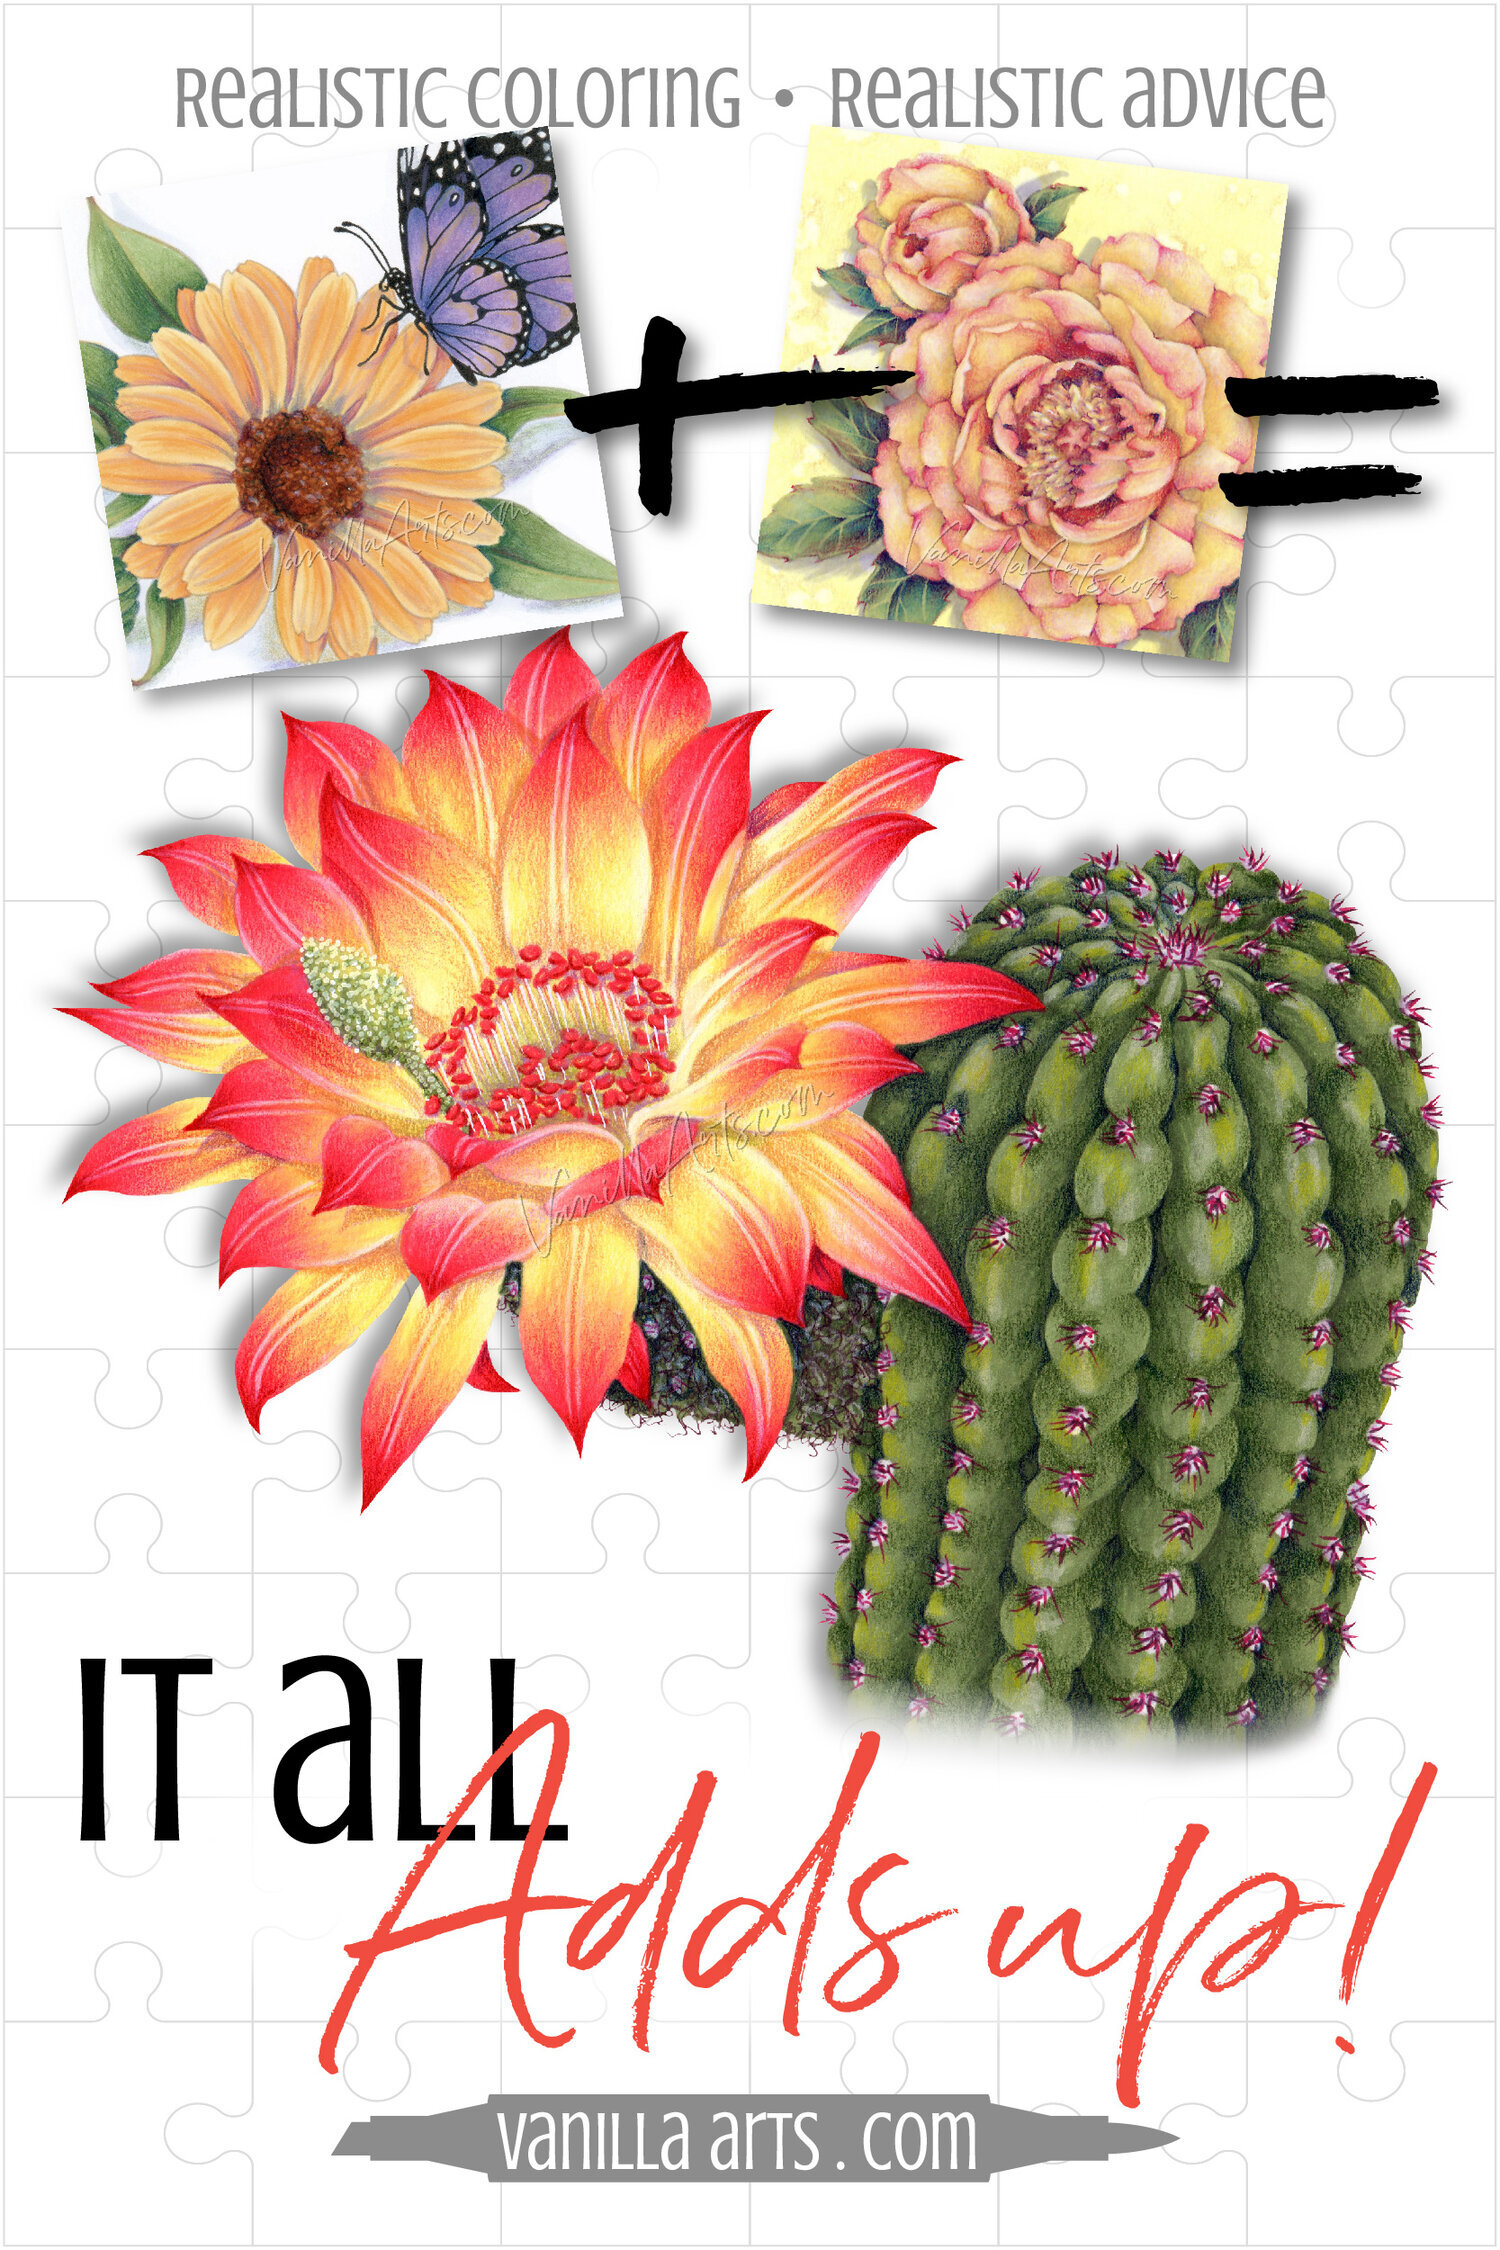 Use What You Learn: Color a Fiery Cactus Flower with Copic Marker & Colored Pencil